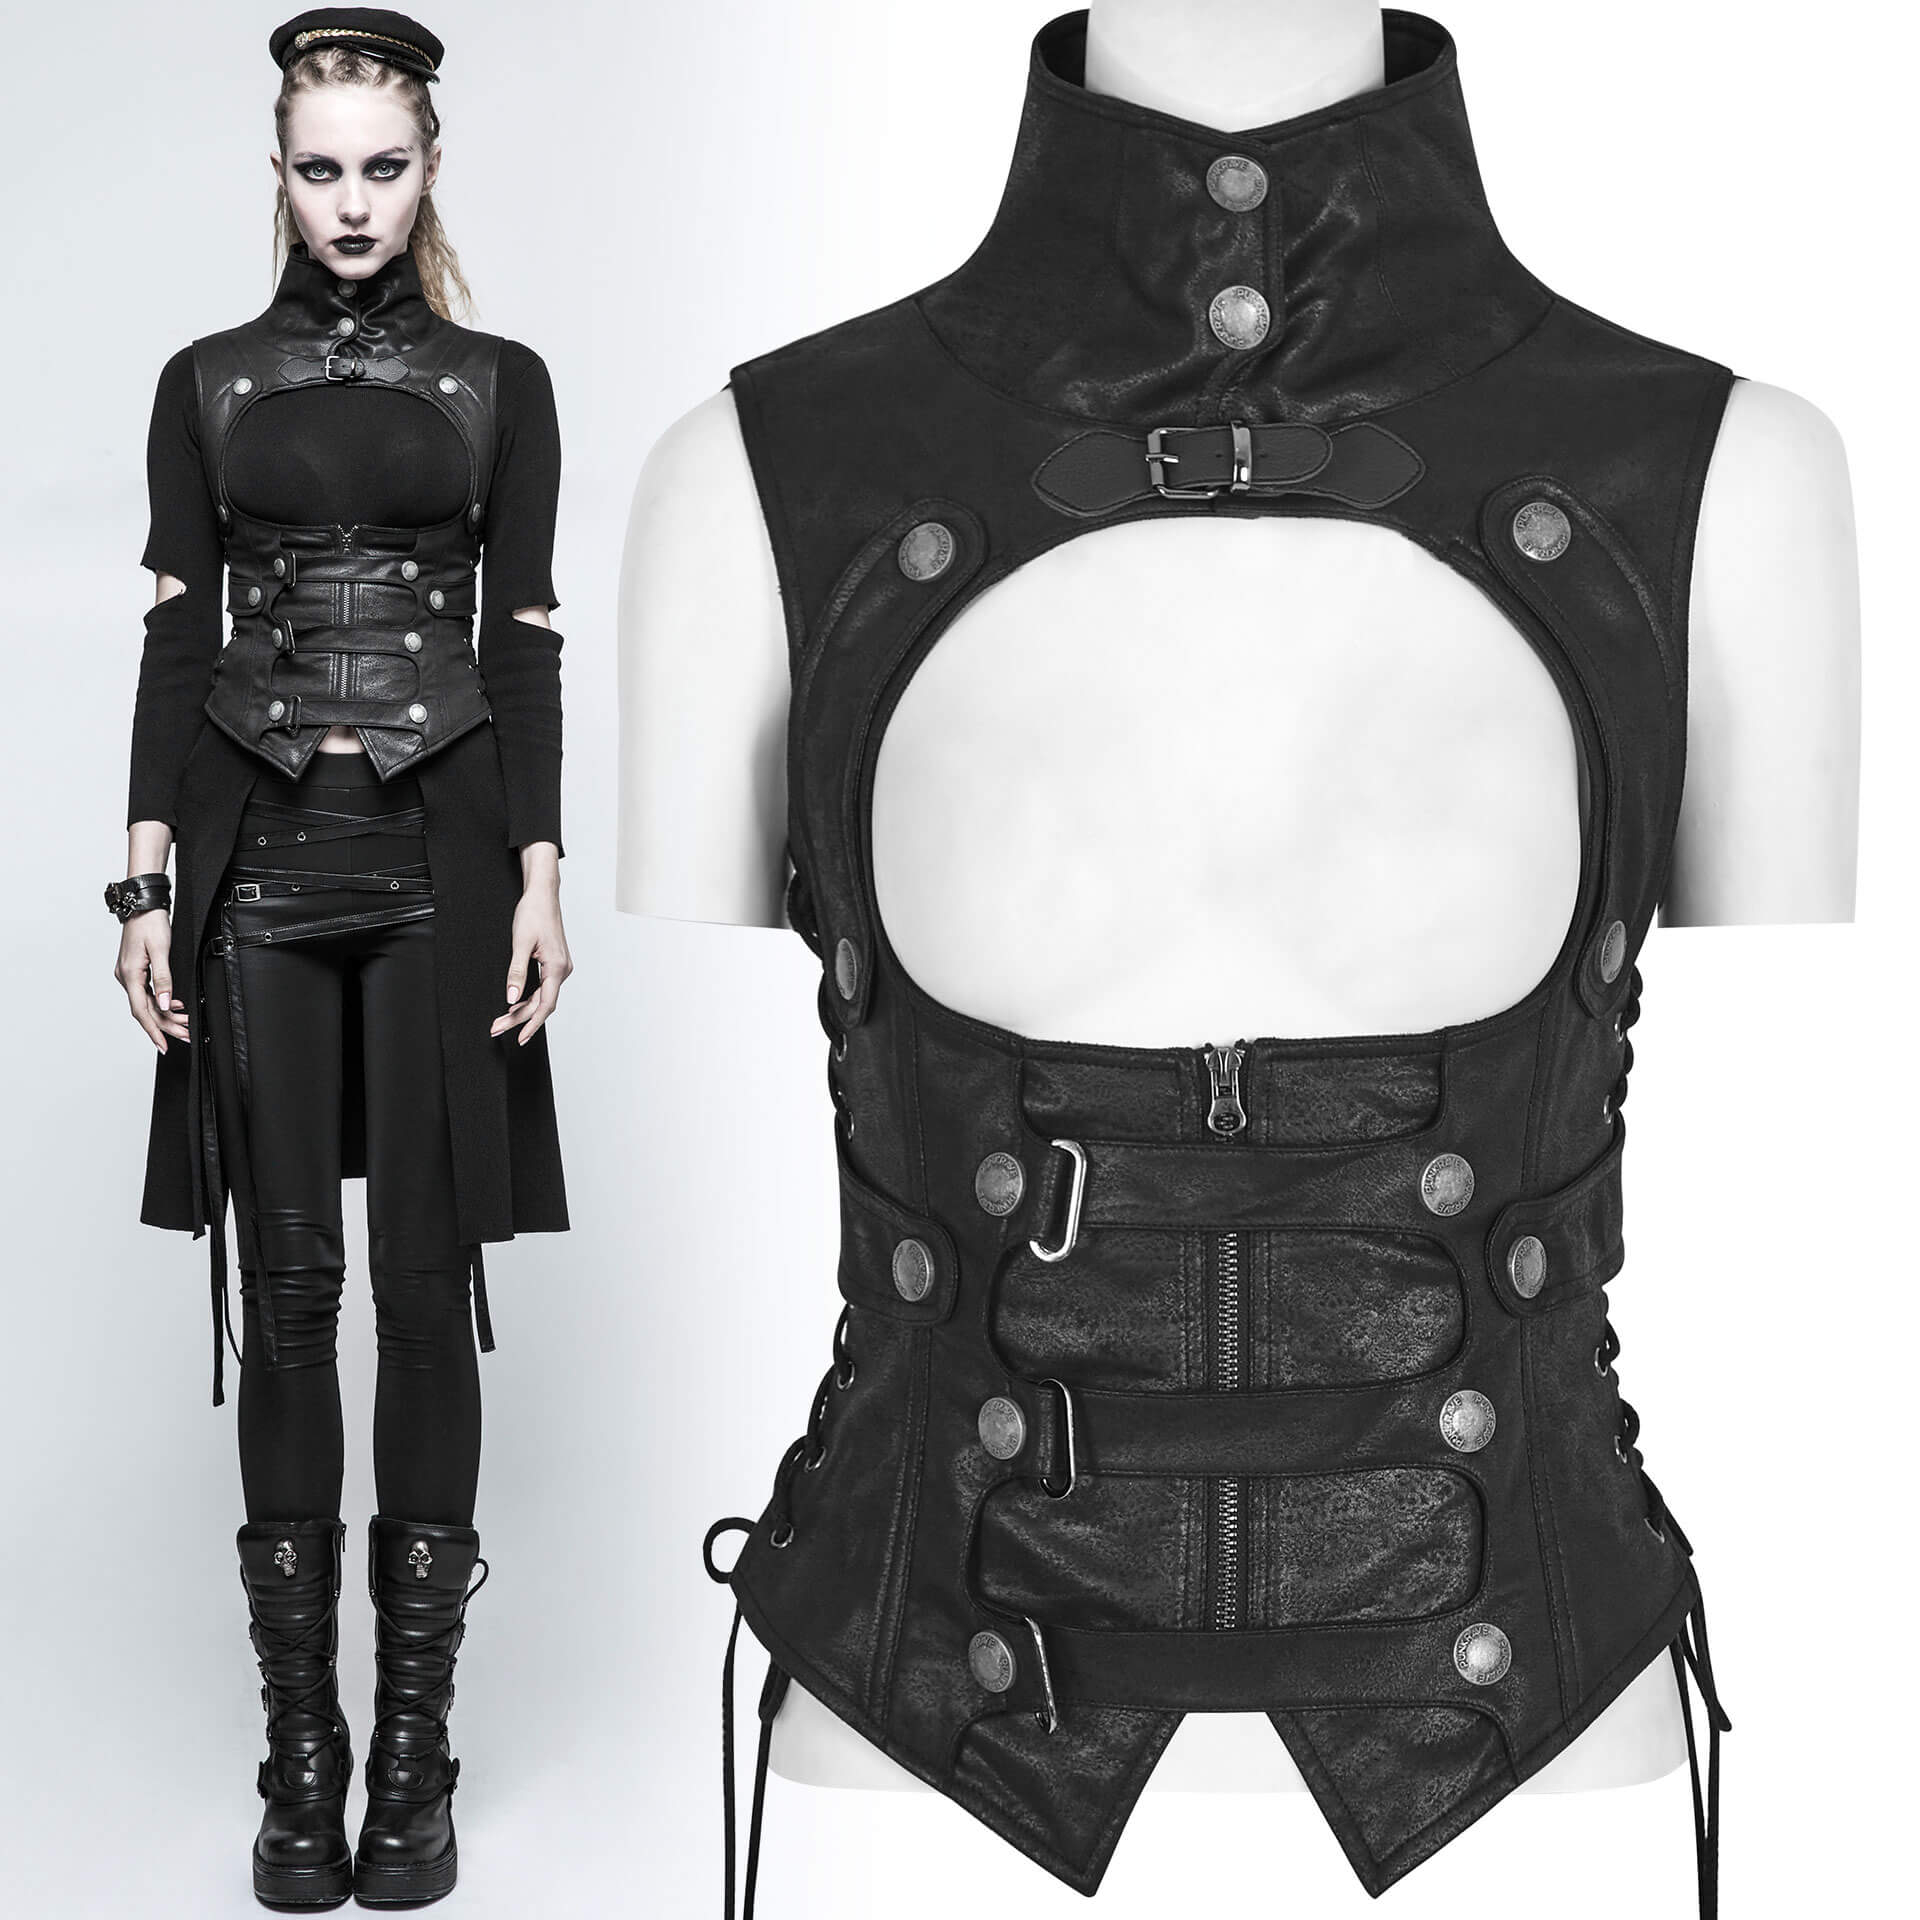 Inquisitor Corset Vest by Punk Rave brand